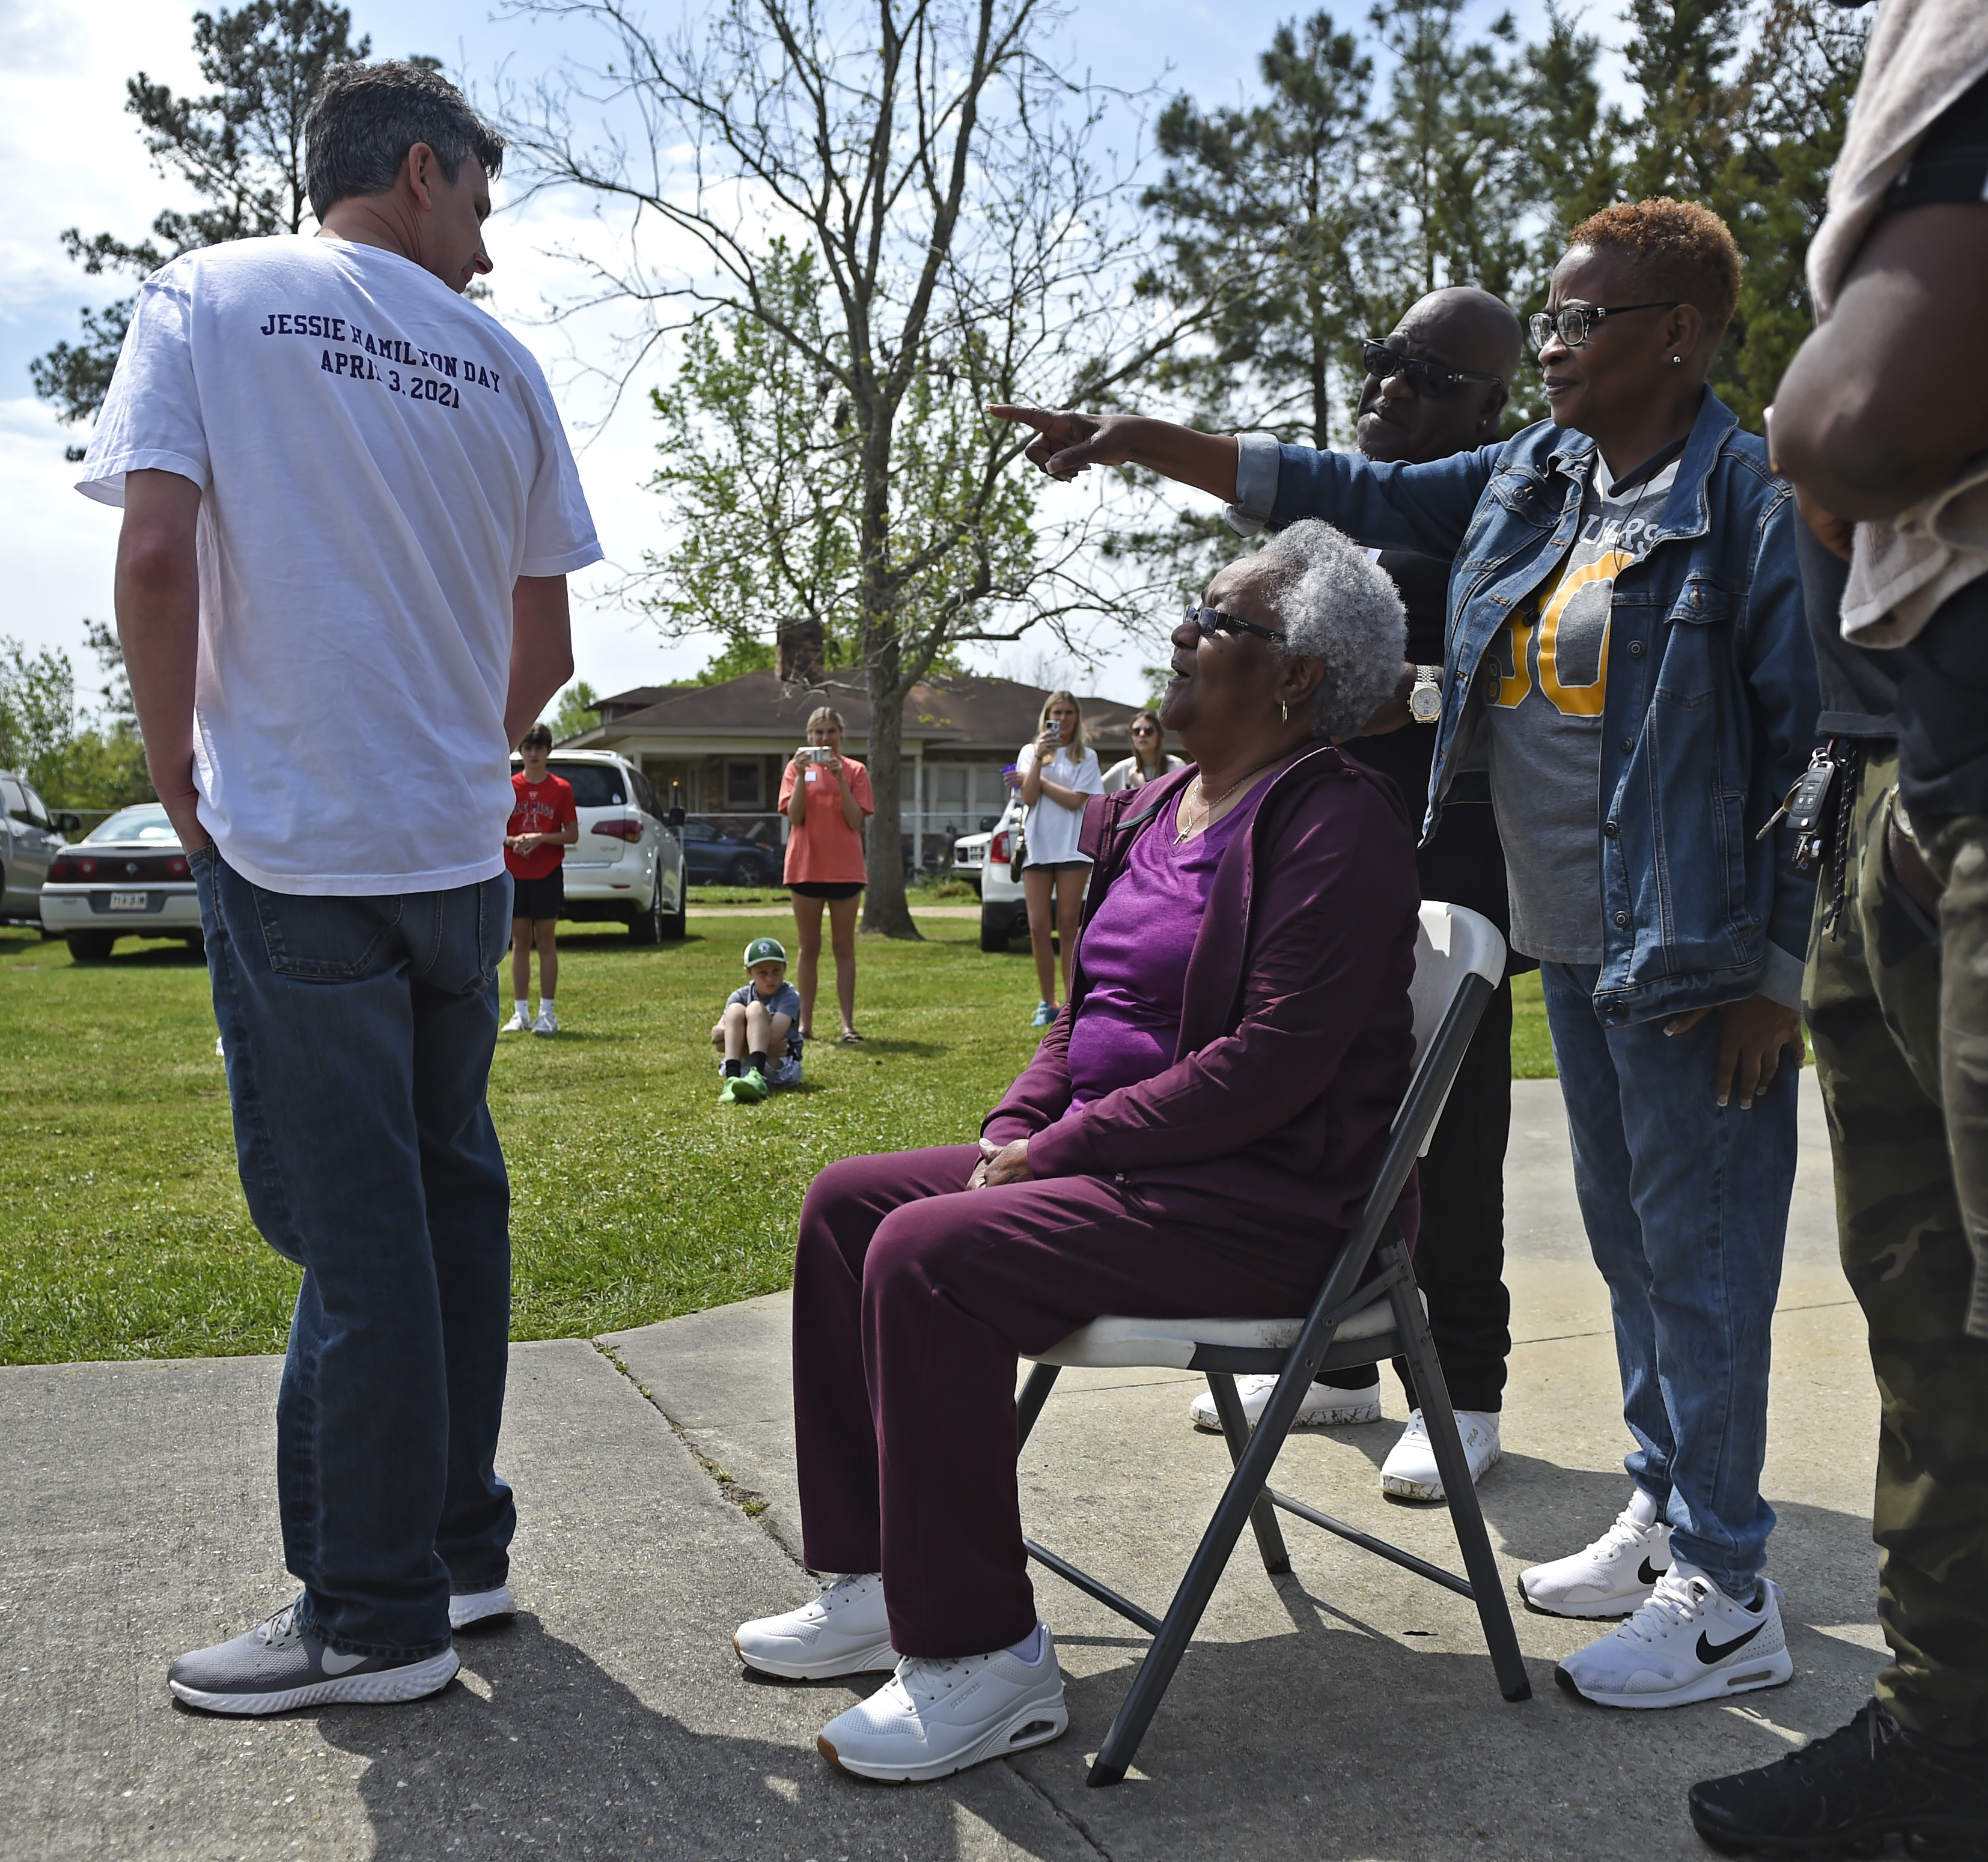 Andrew Fusaiotti, left, turns around to show Jessie Hamilton, seated, the back of his shirt as Ms Hamilton's daughter, Yonetta Tircuit, right, points as LSU FIJI graduates gather to surprise their former house kitchen staff member to pay off her mortgage and celebrate Jessie Hamilton Day in Baker, Louisiana